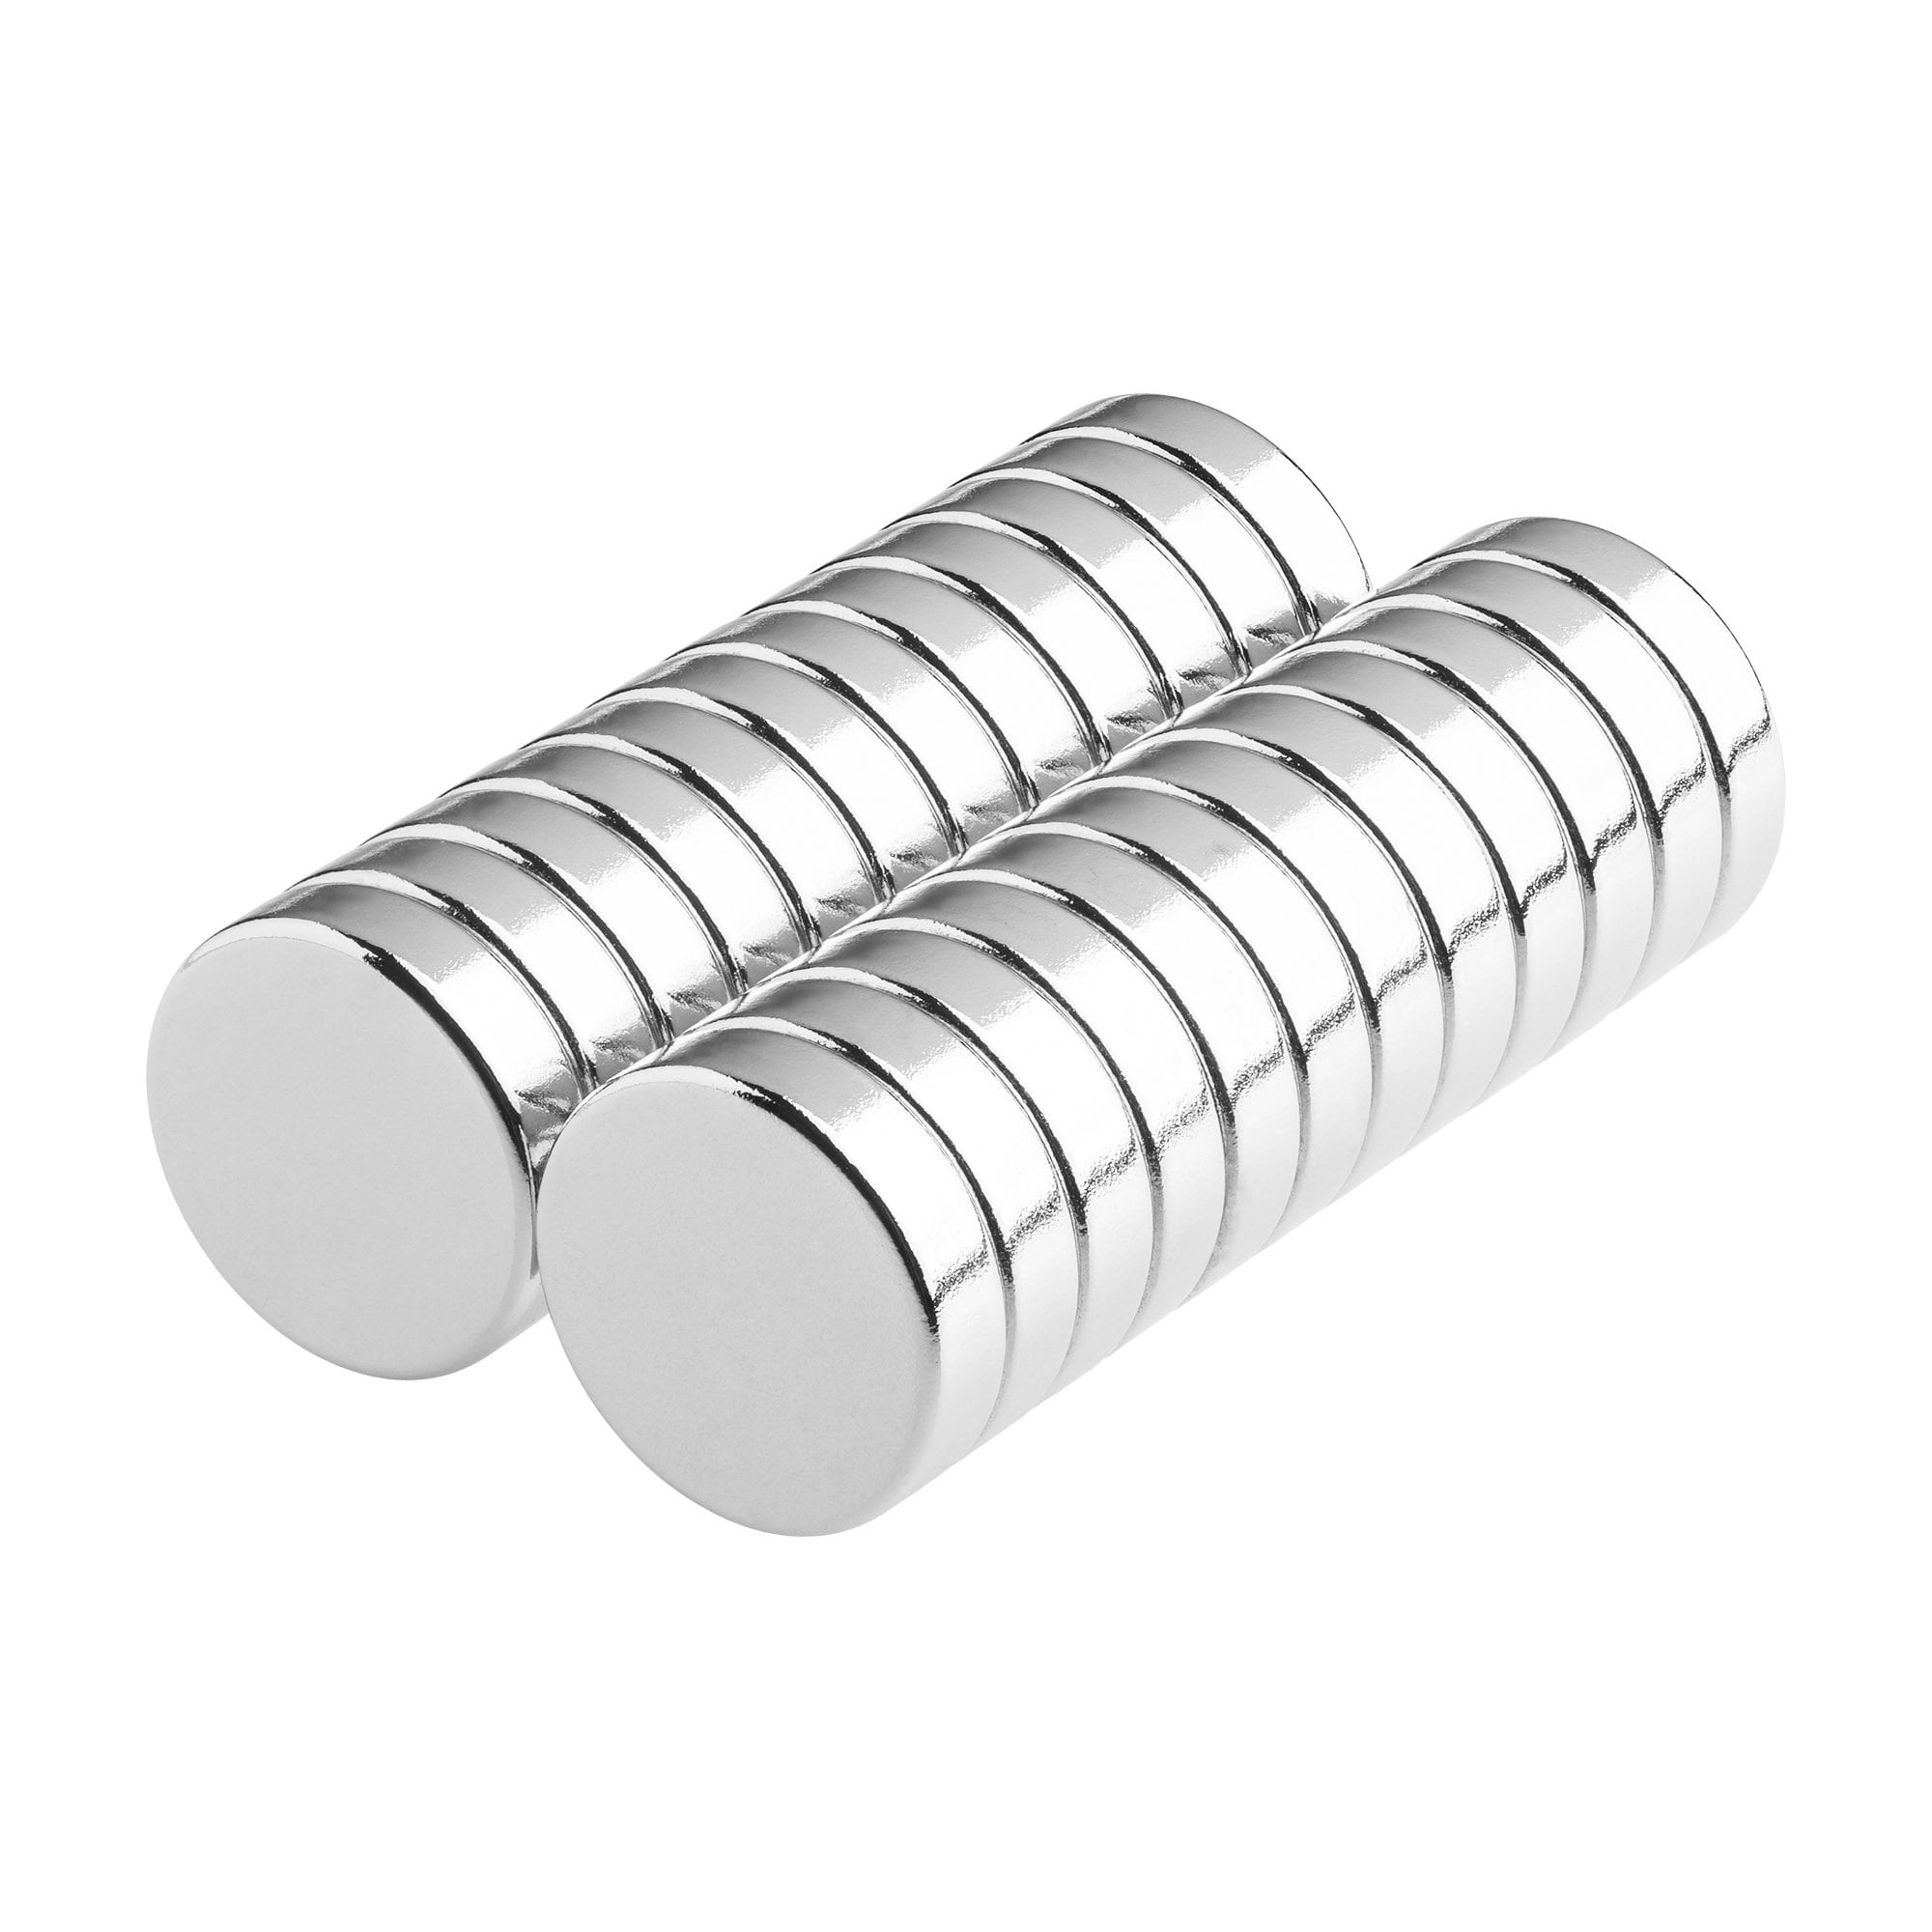 100 NEODYMIUM magnets 3/4" x 3/16" x 1/8" super strong rare earth magnets N52 